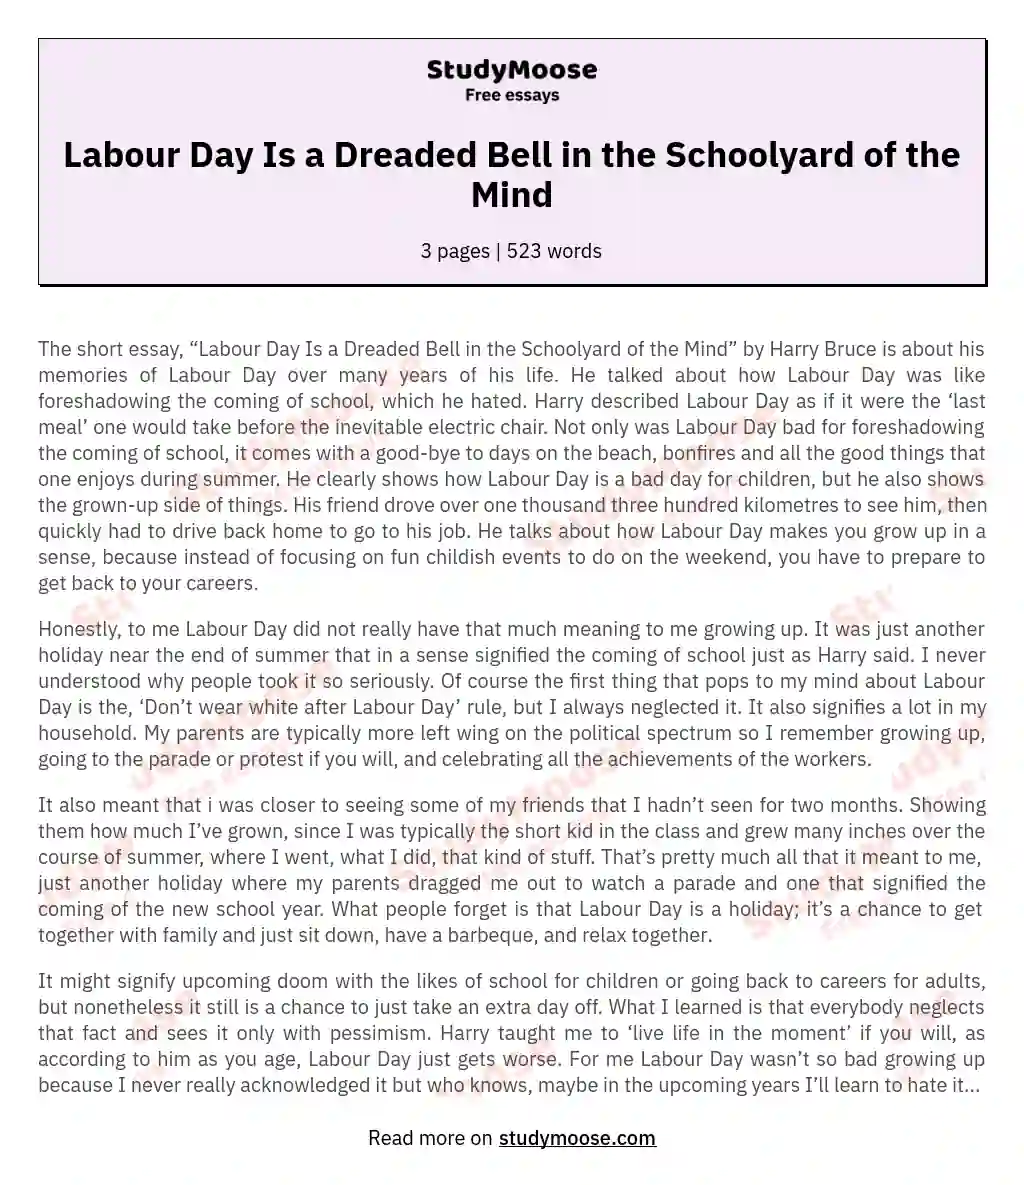 Labour Day Is a Dreaded Bell in the Schoolyard of the Mind essay